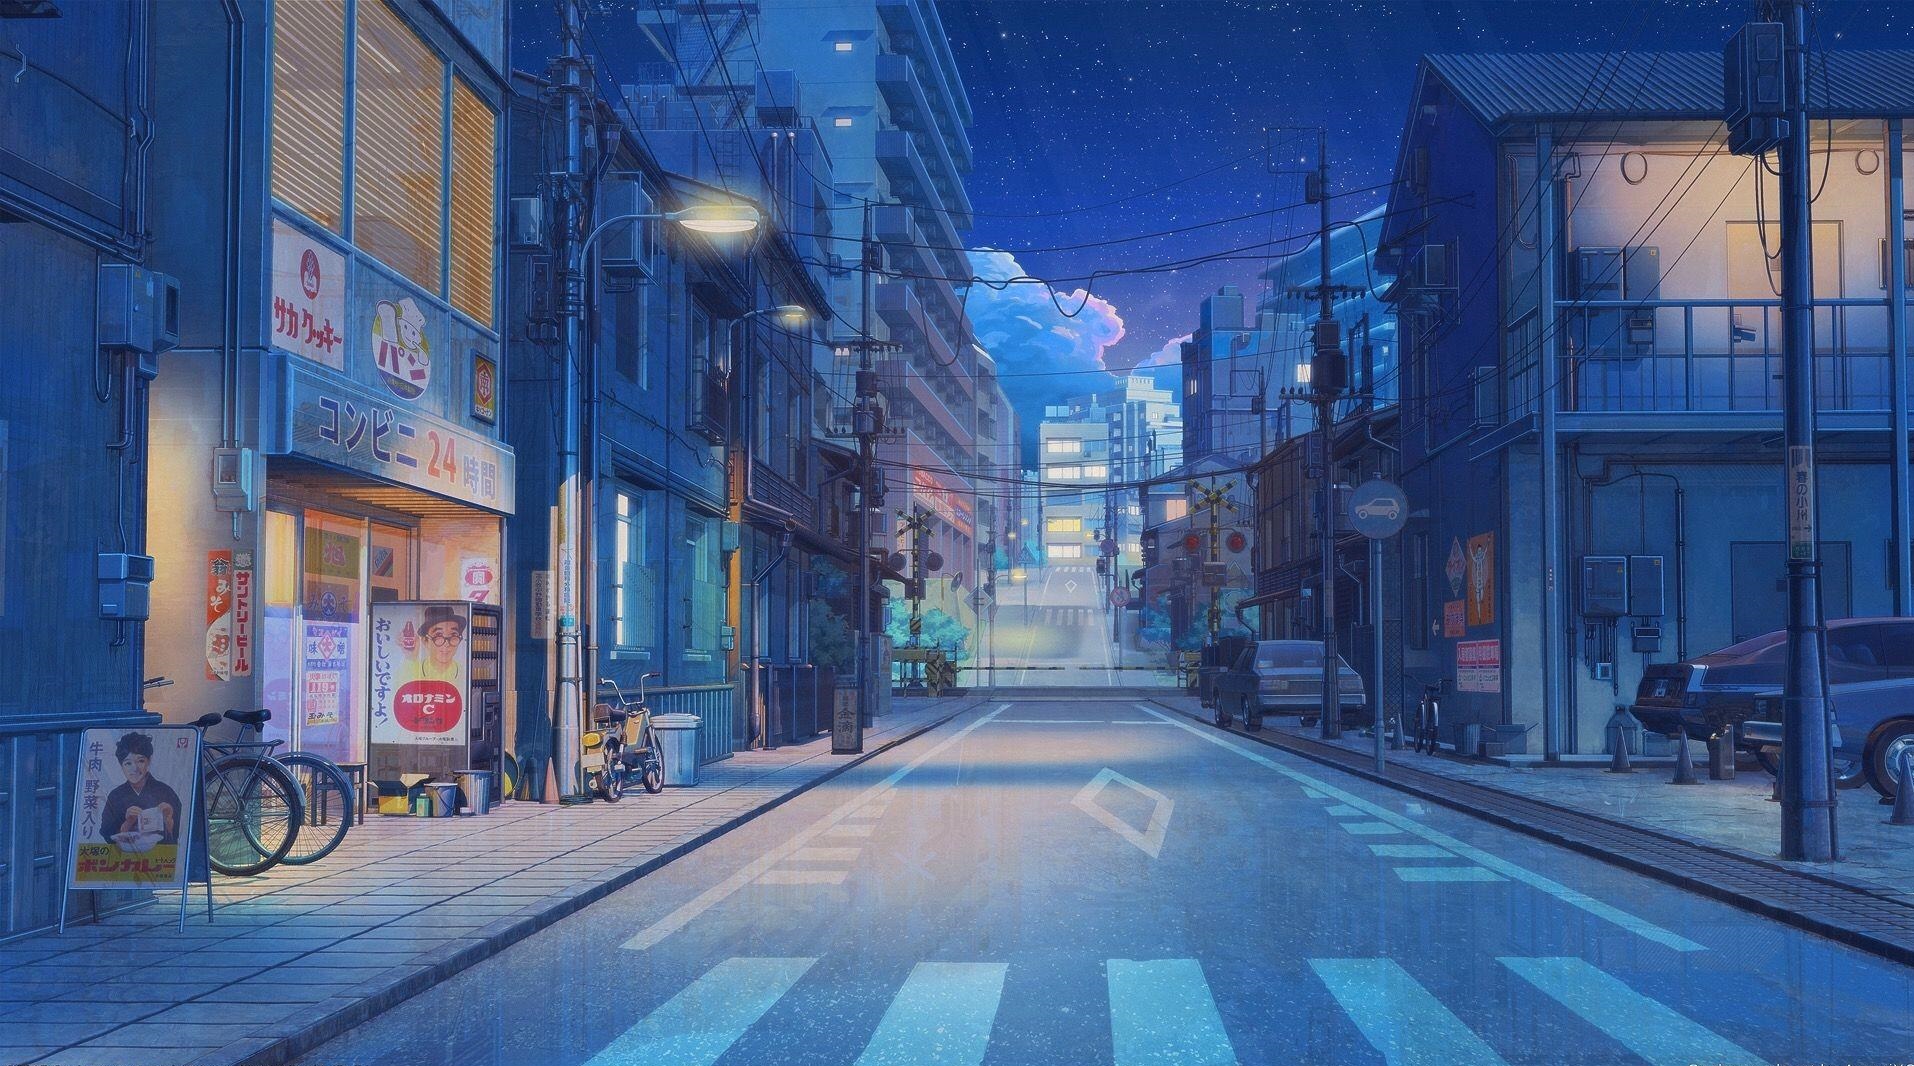 Free download Anime Wallpaper Aesthetic HD